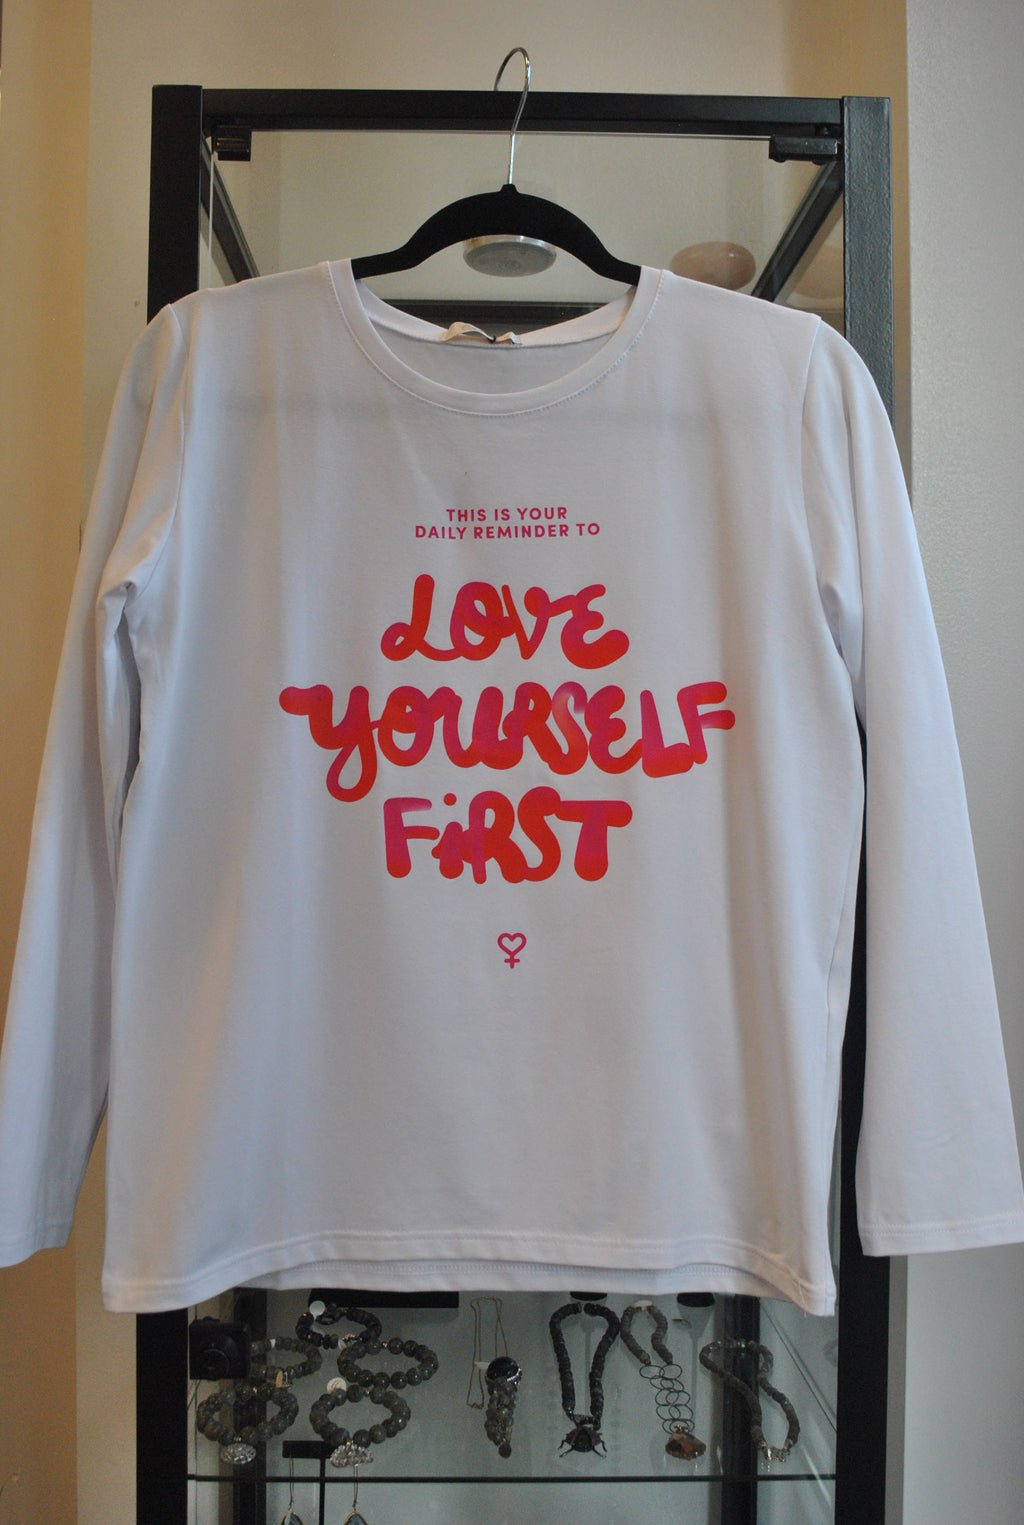 WHITE TOP "LOVE YOURSELF FIRST"